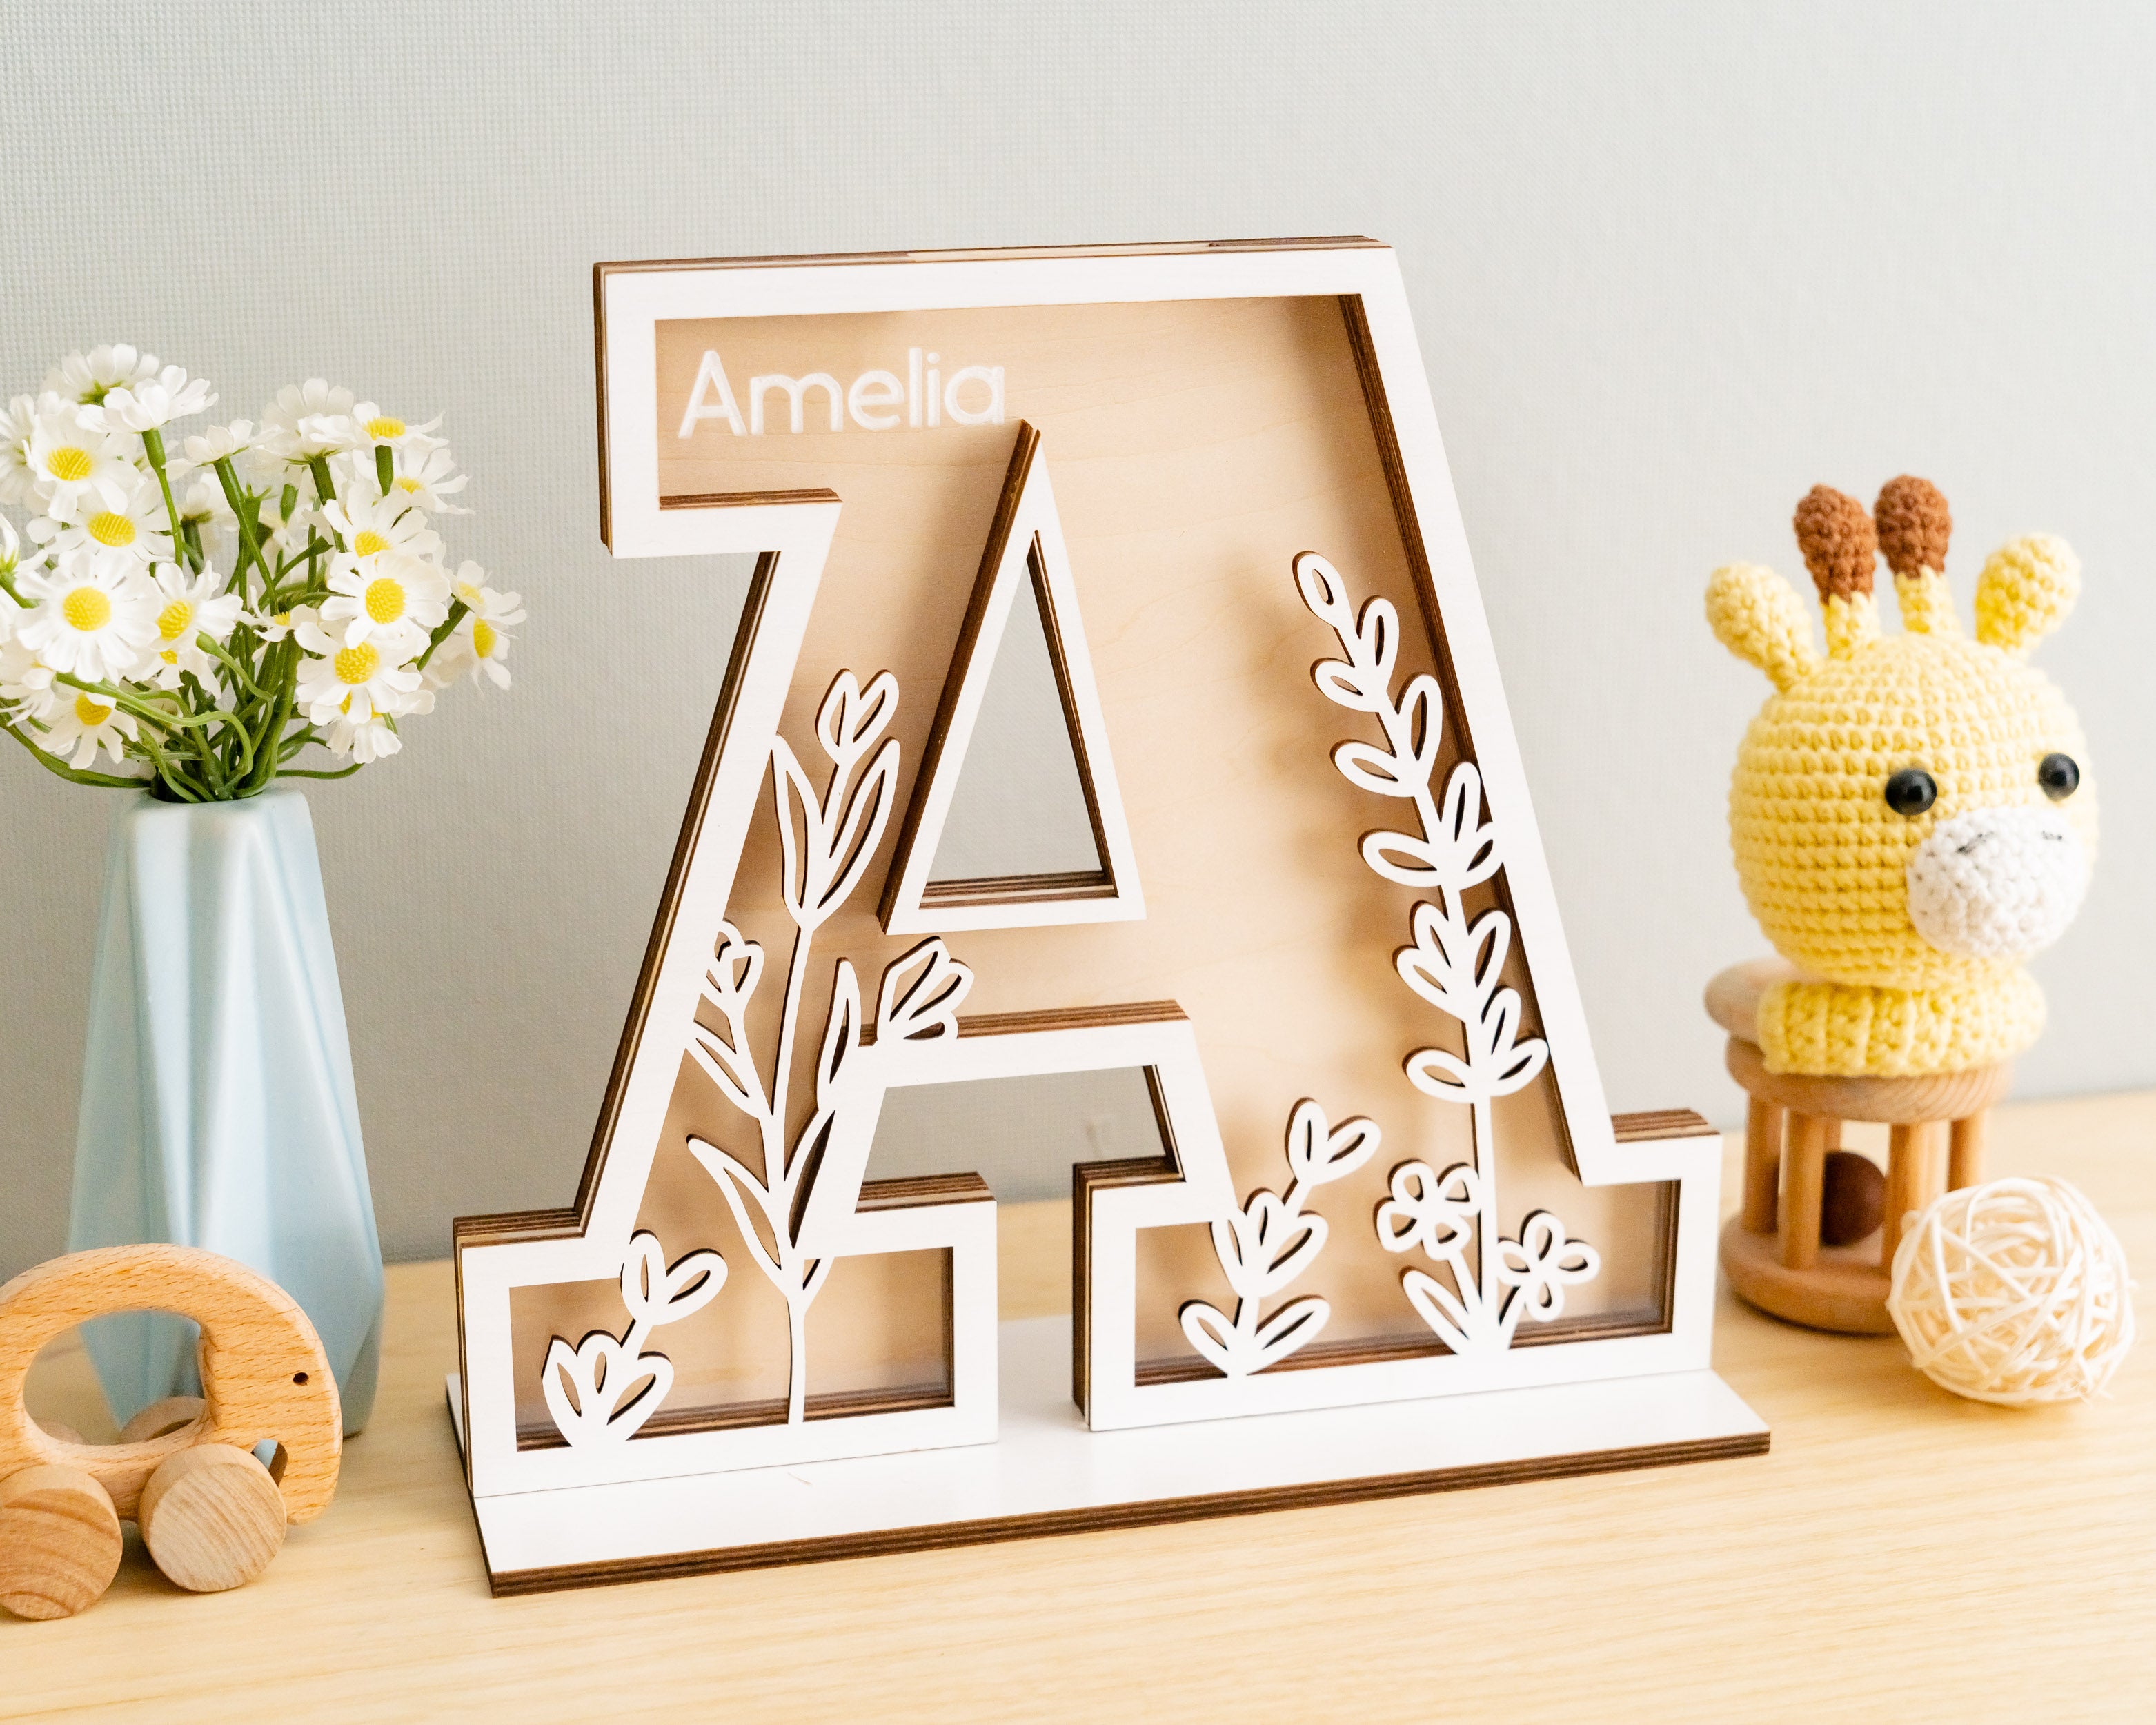 Boho Chic Personalized Letter Coin Bank for Nursery Savings